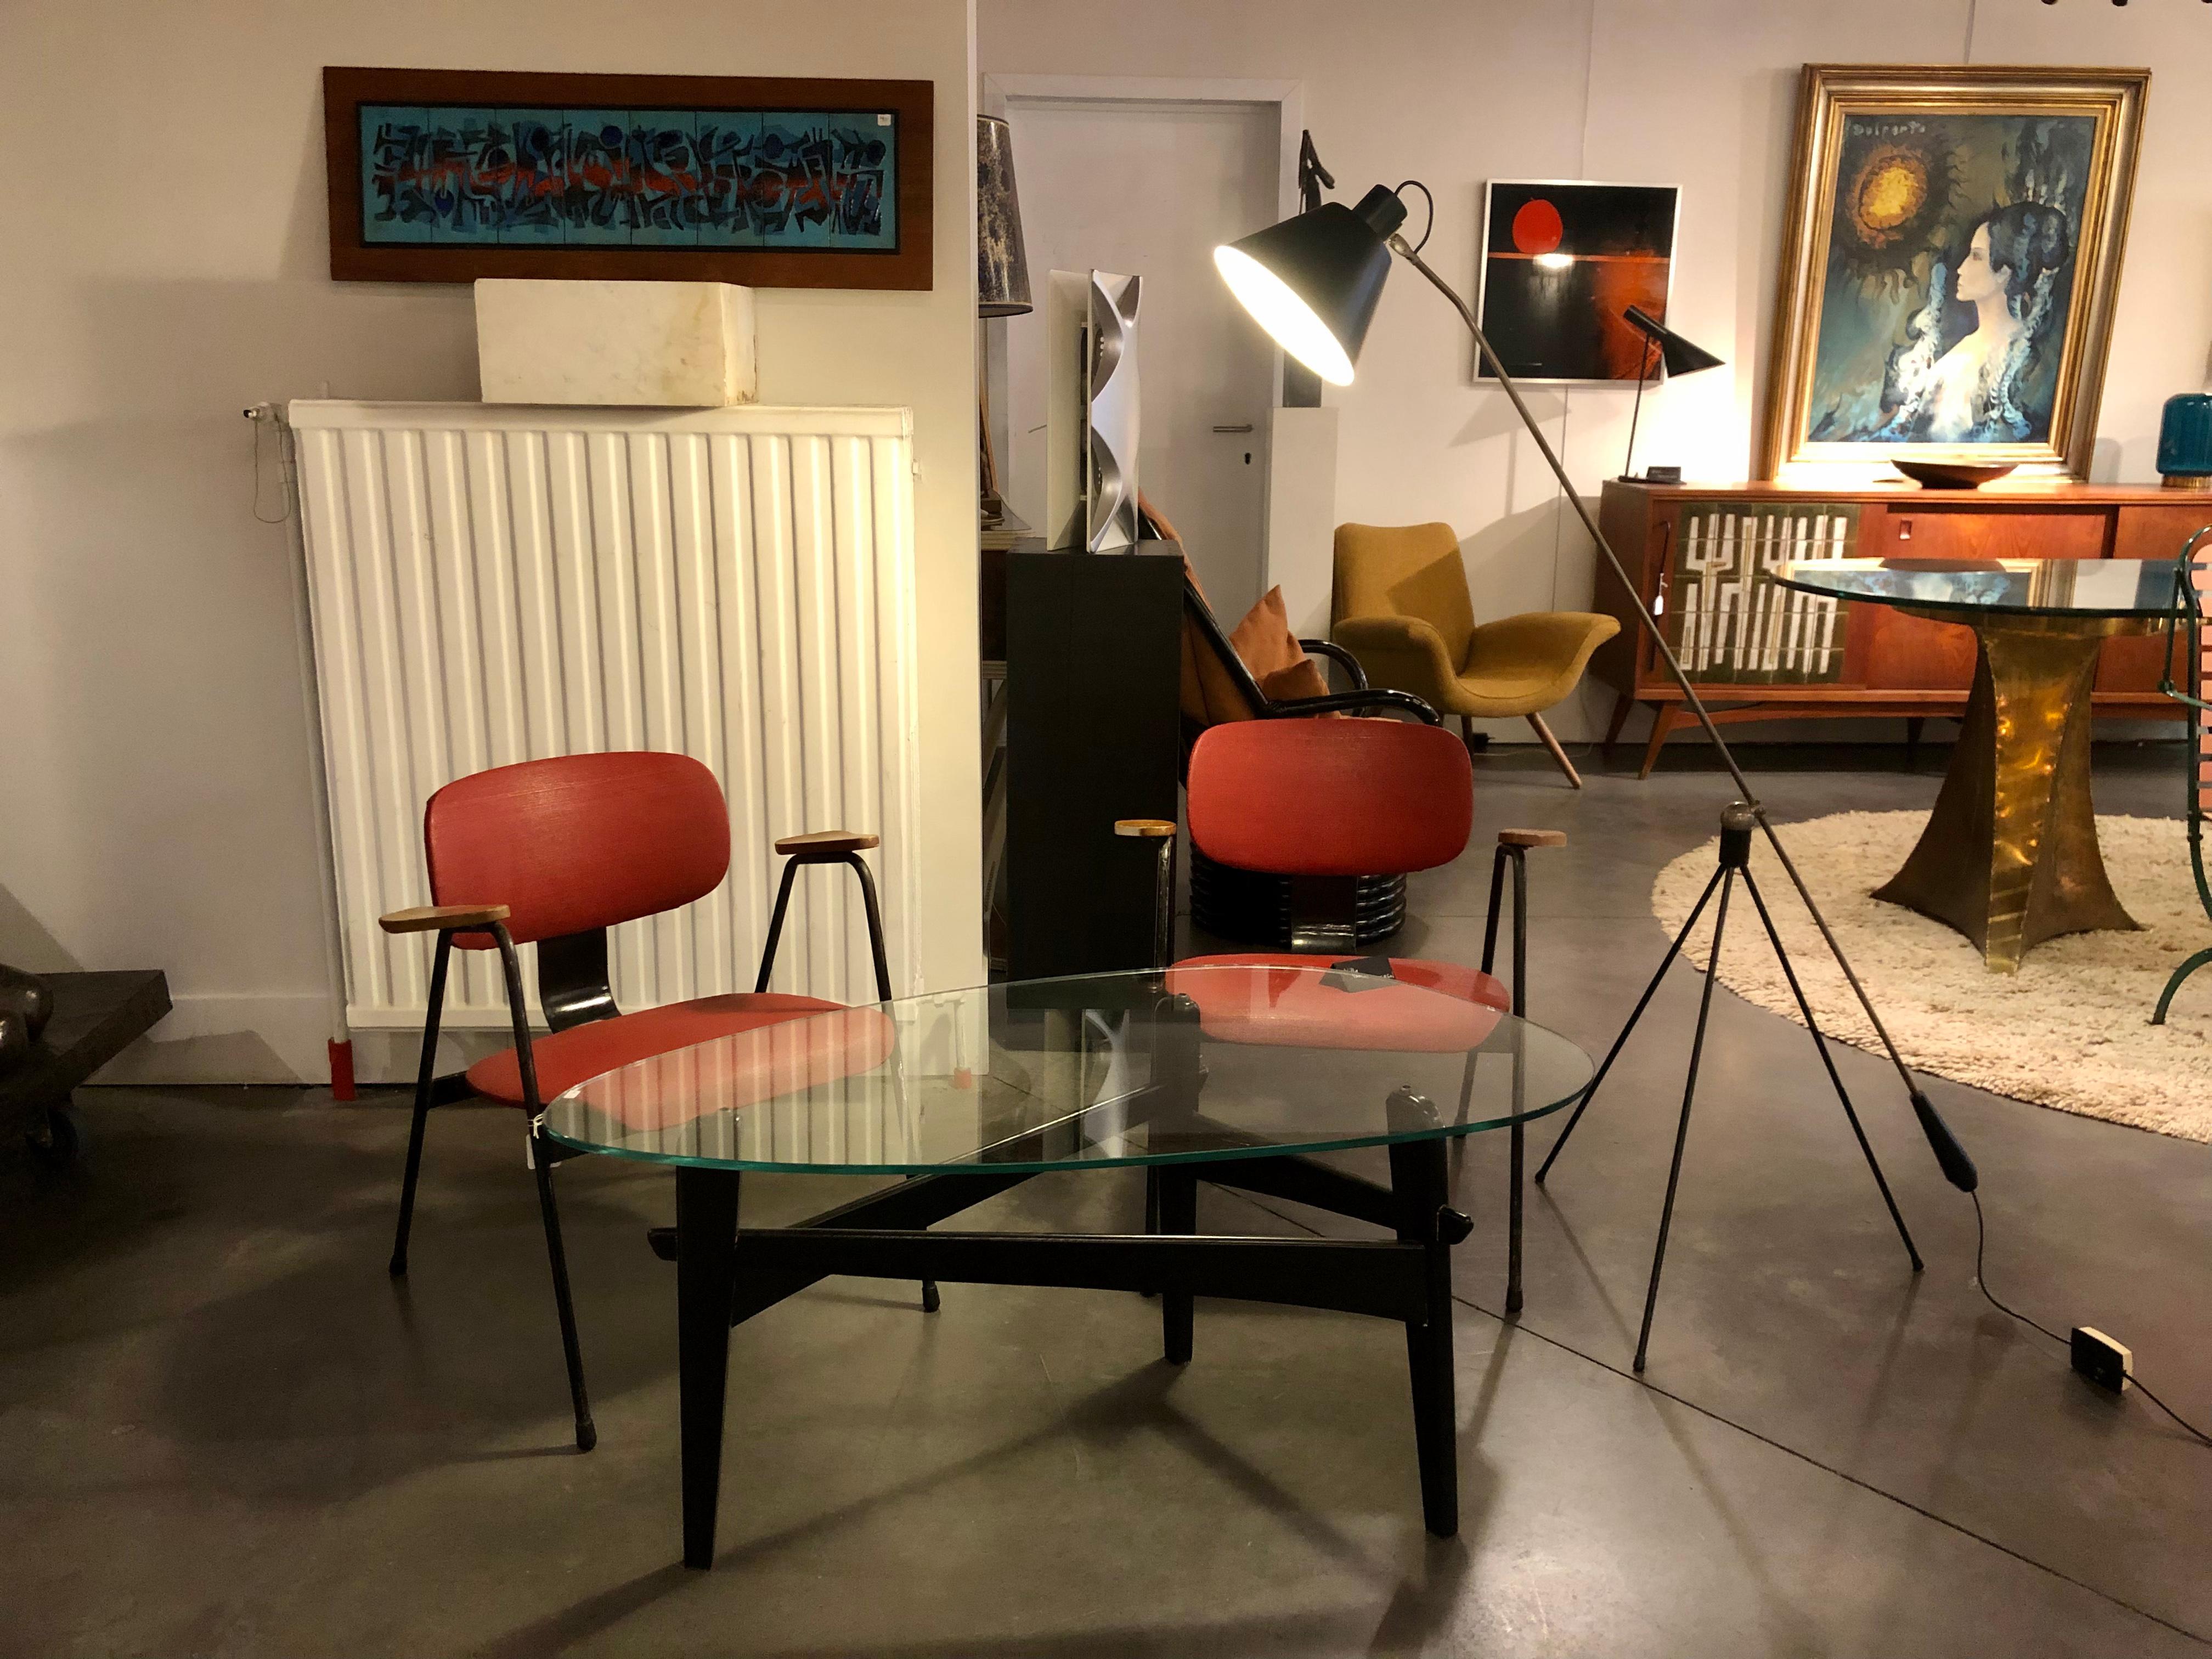 Floor lamp designed by H.Fillekes in 1954 for Artiforte.
Small production and great design this is a truly collector item.
All the parts are original (except the switch) painting is also original.
The patina is perfect.